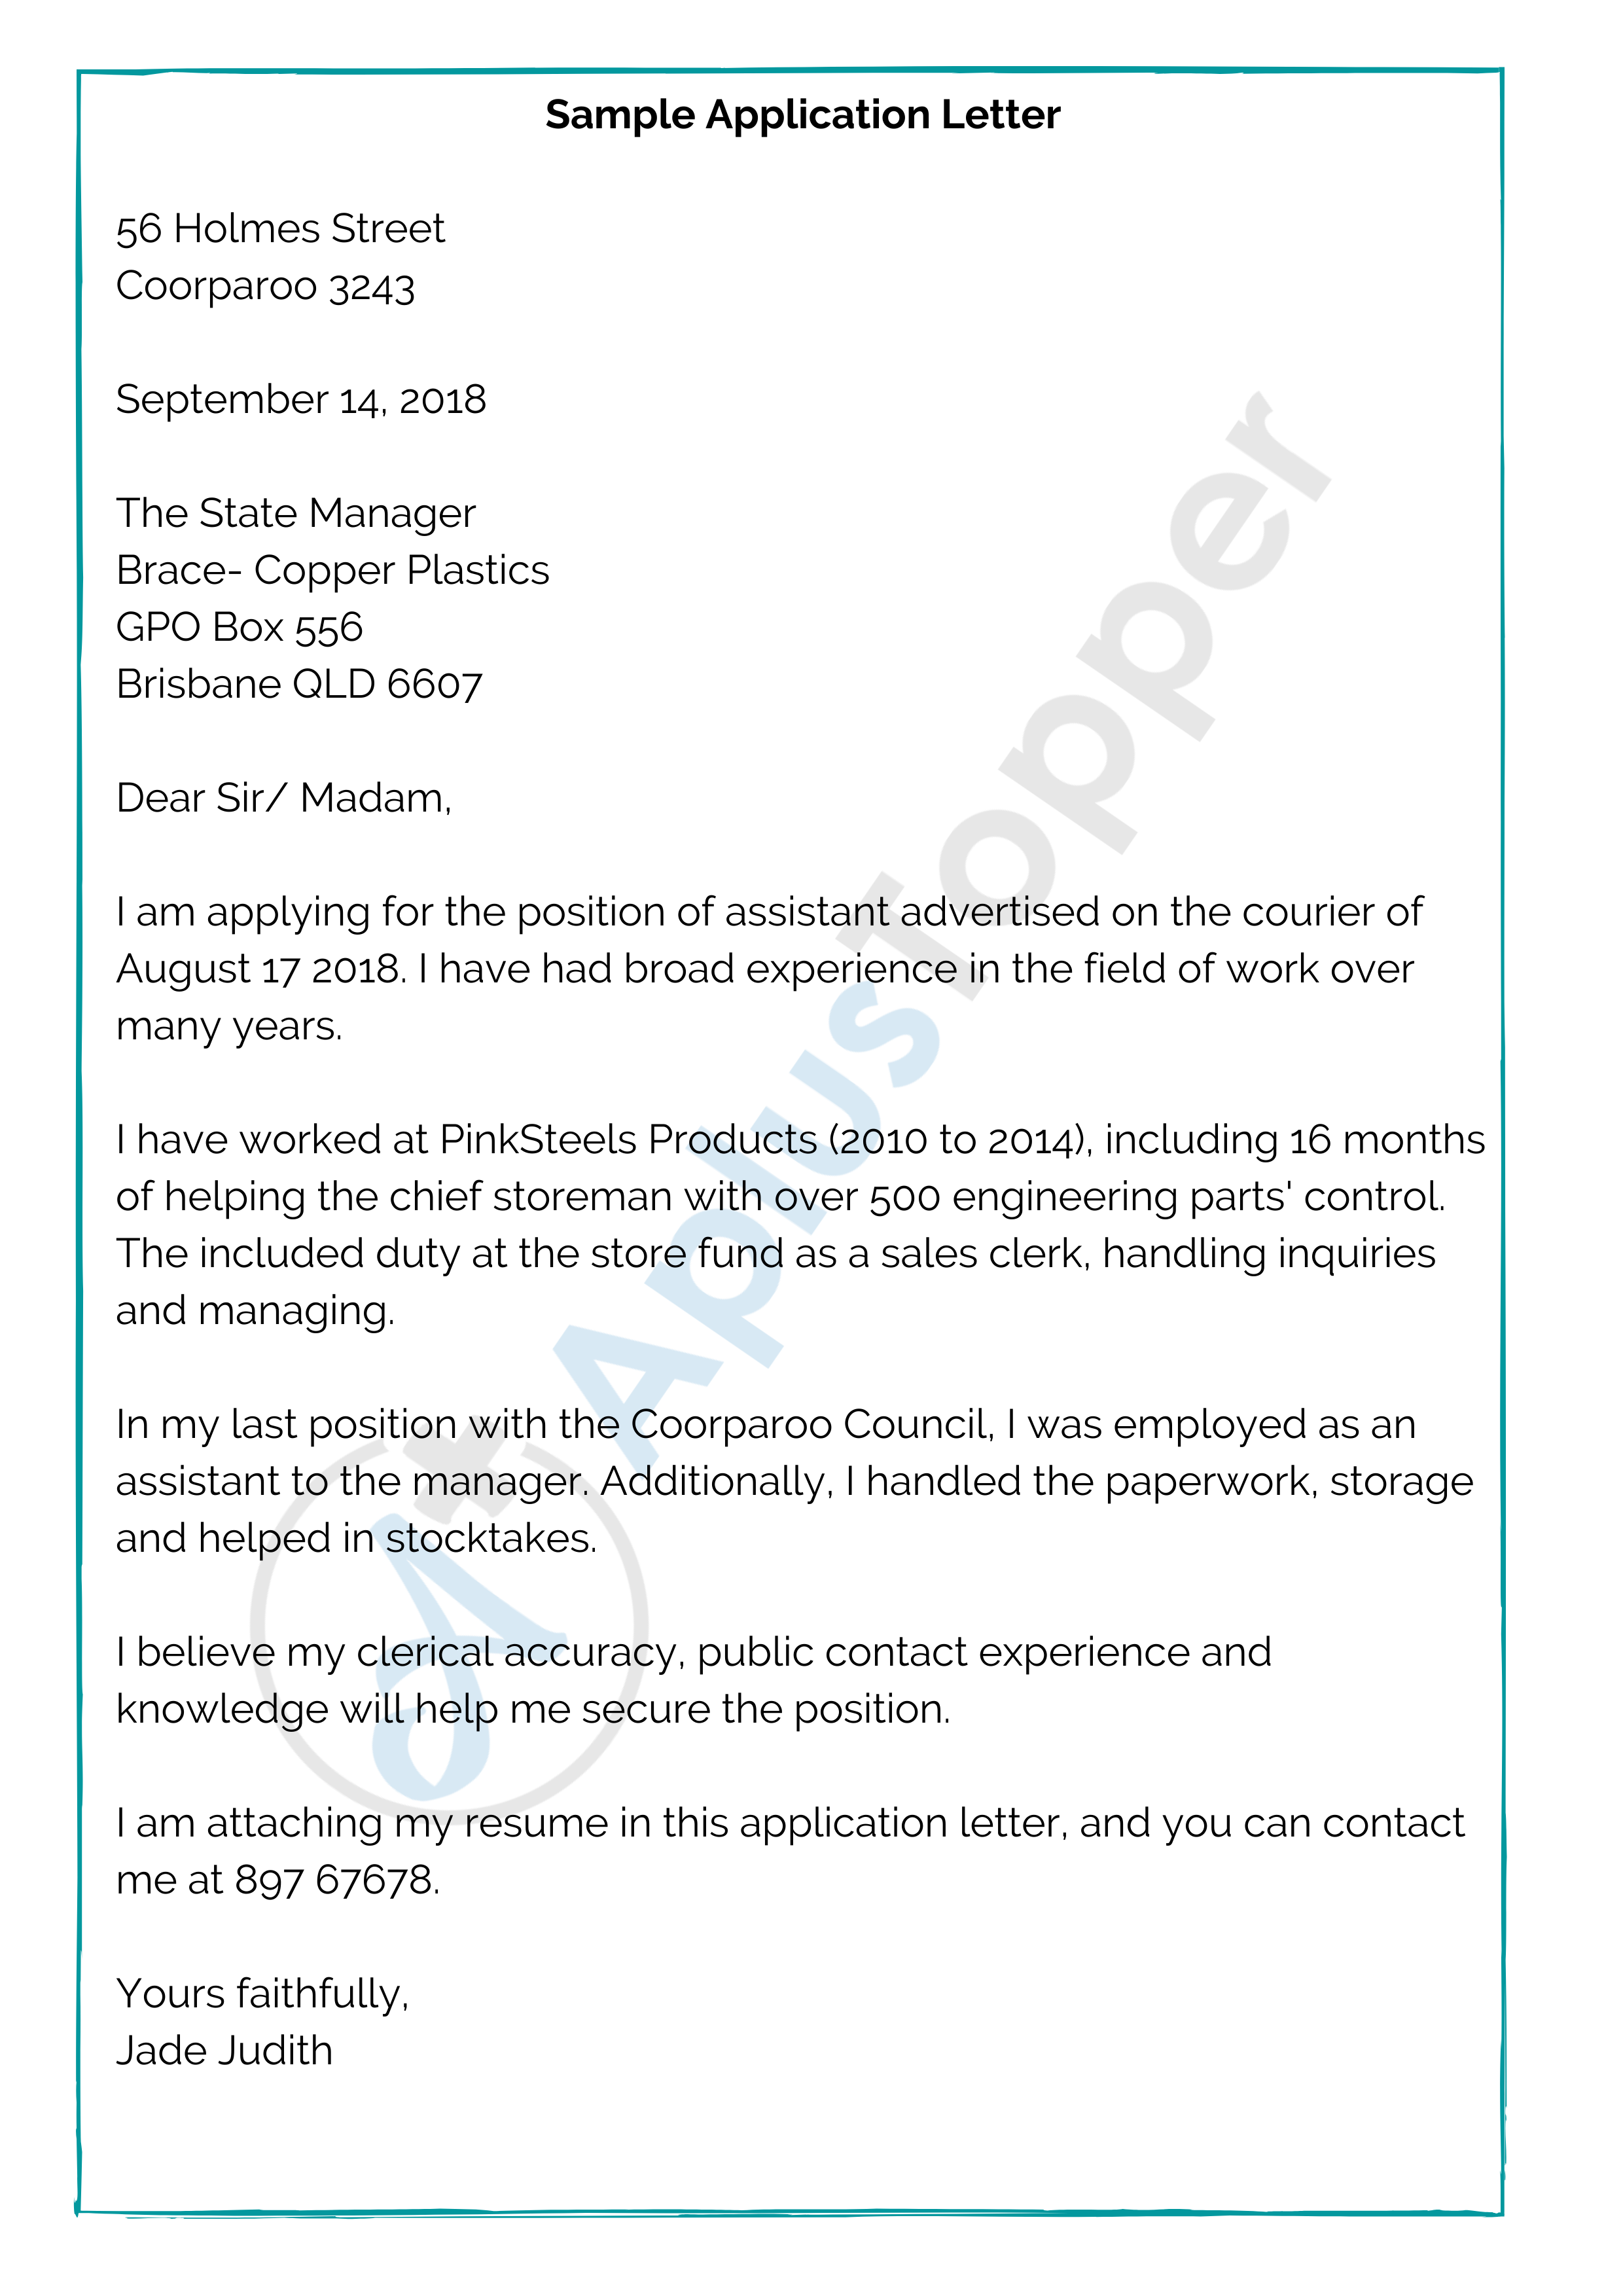 example of application letter sample